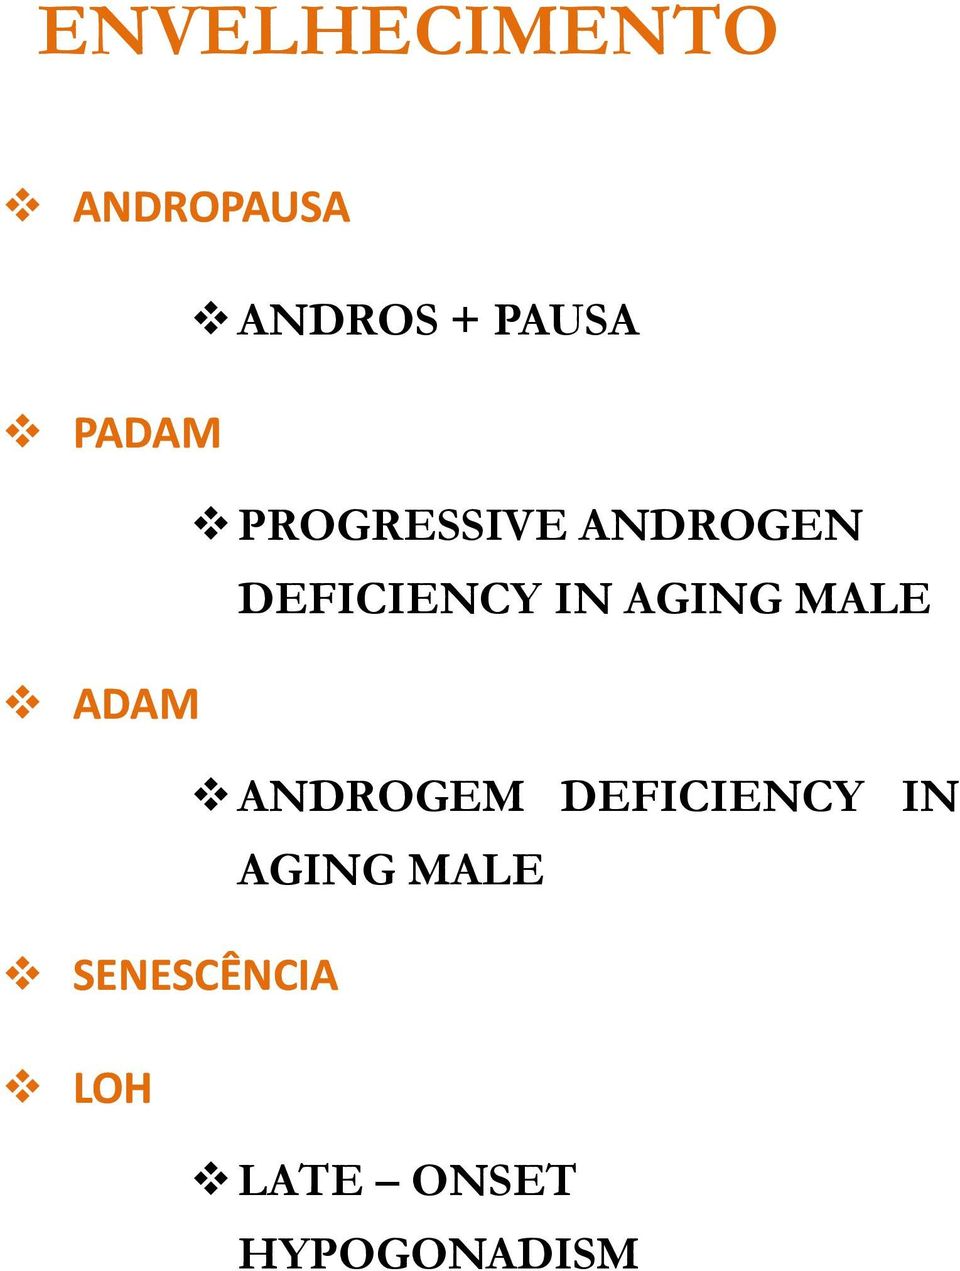 ANDROGEN DEFICIENCY IN AGING MALE ANDROGEM